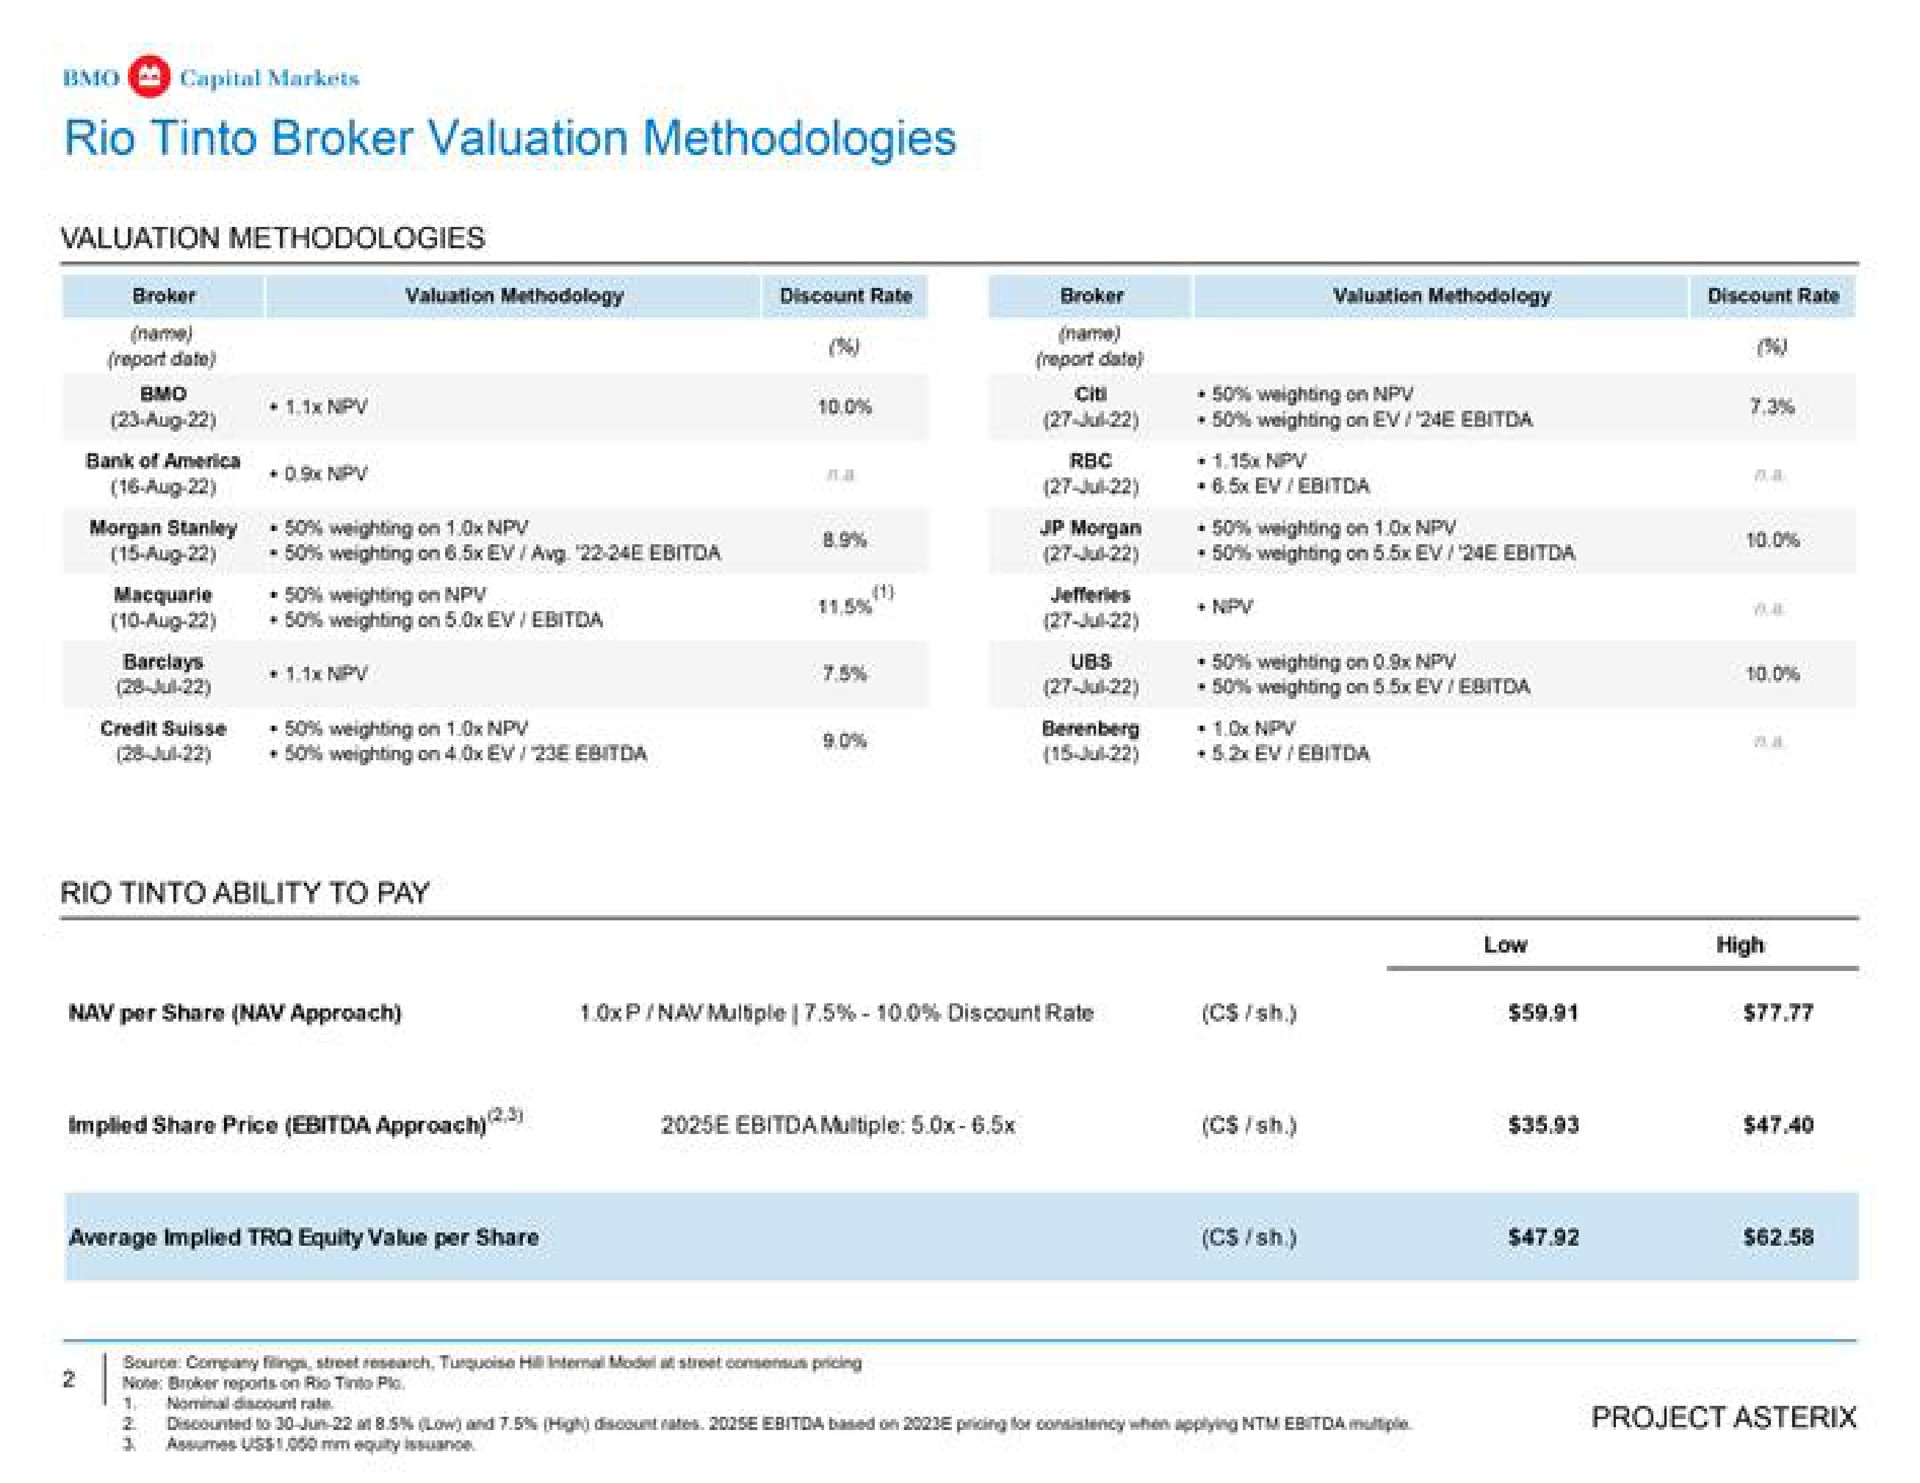 rio broker valuation methodologies report date data implied share price approach multiple average implied equity value per share | BMO Capital Markets